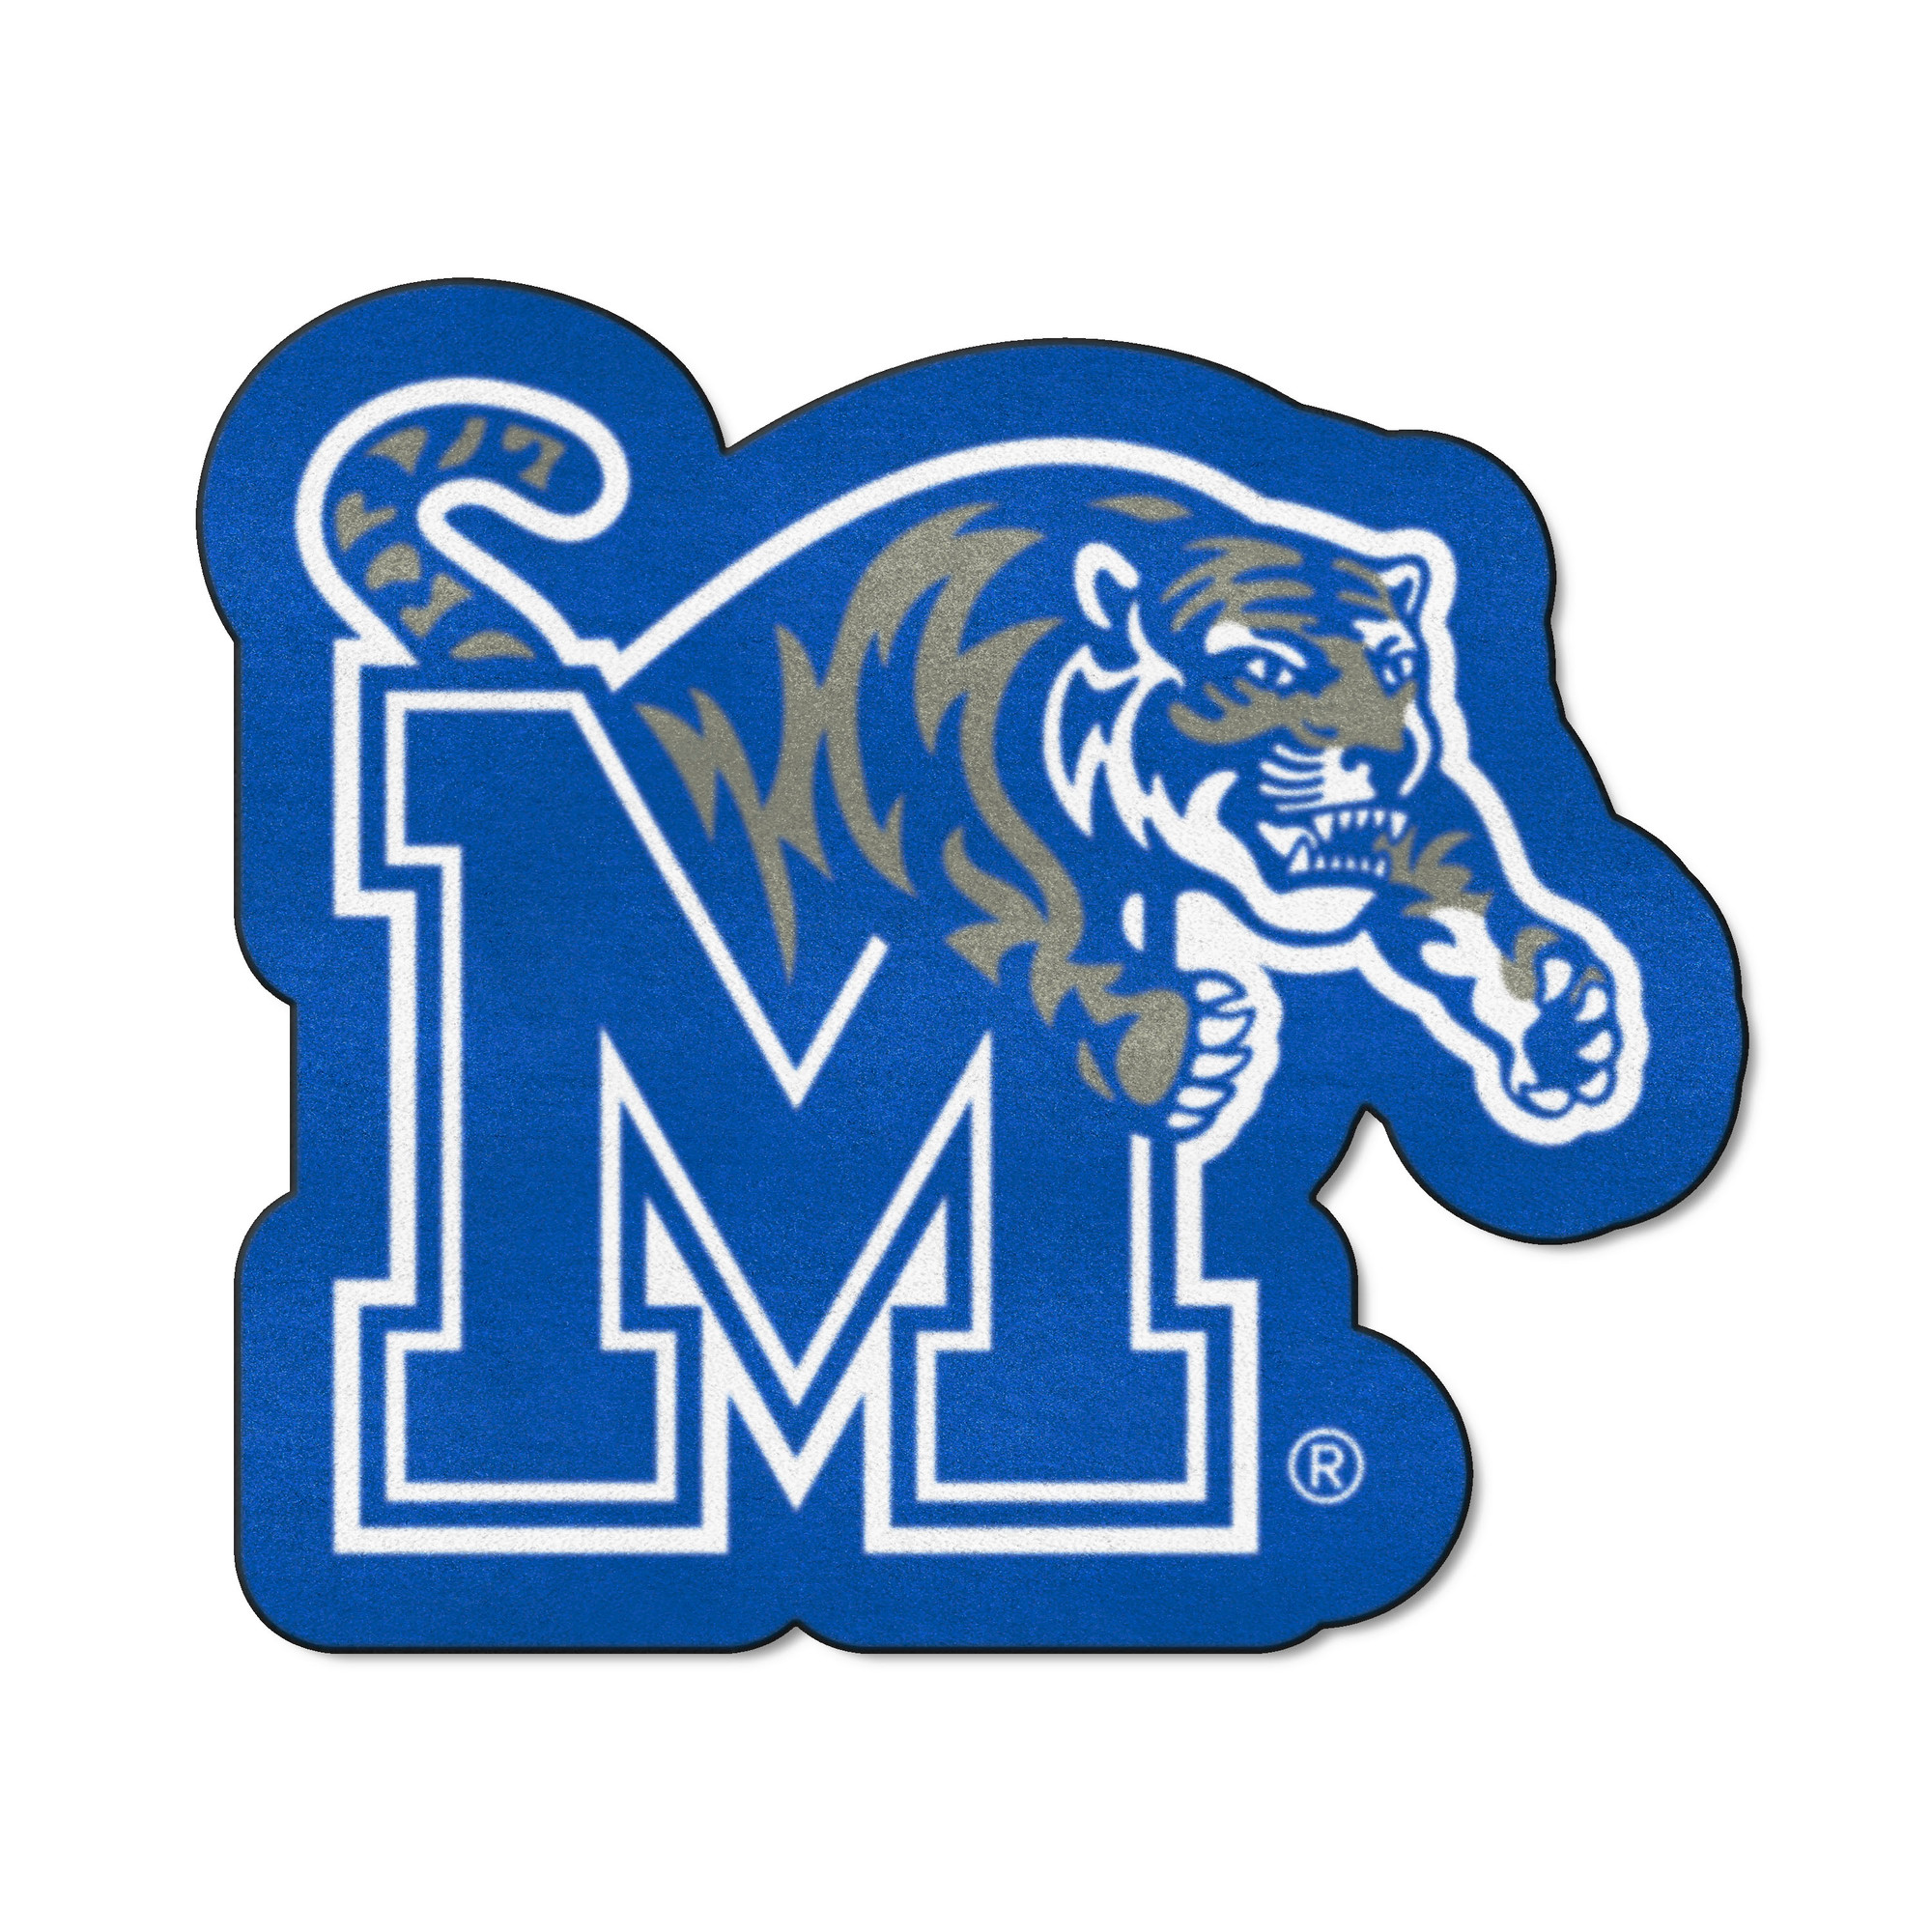  FANMATS NCAA Memphis Tigers Team Decal, 3-Pack, 61074